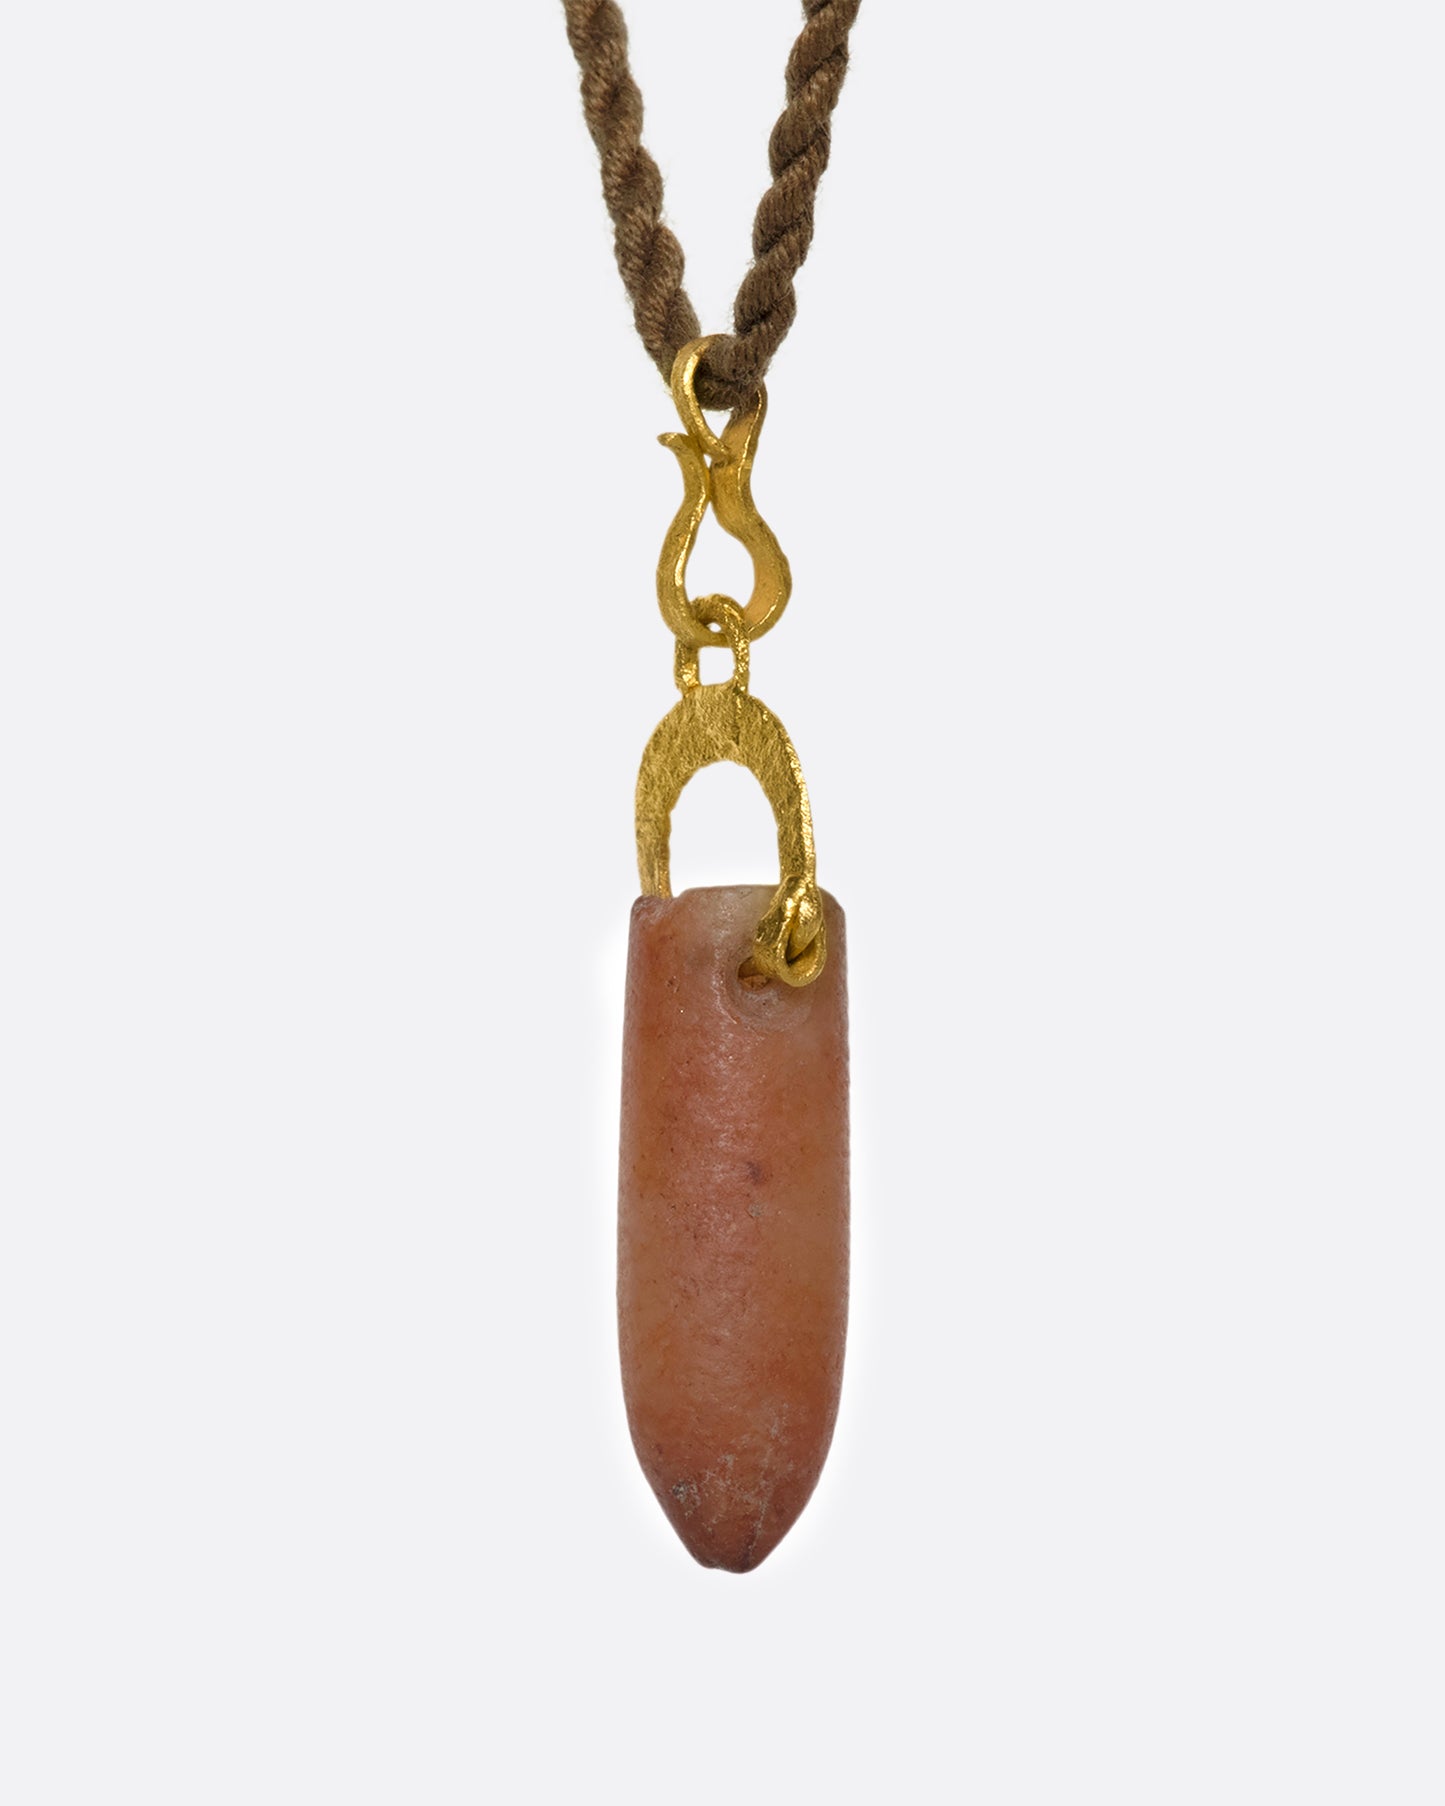 A stunning pre-Columbian carnelian bullet pendant suspended in 22k gold from a lengthy, twisted brown chord